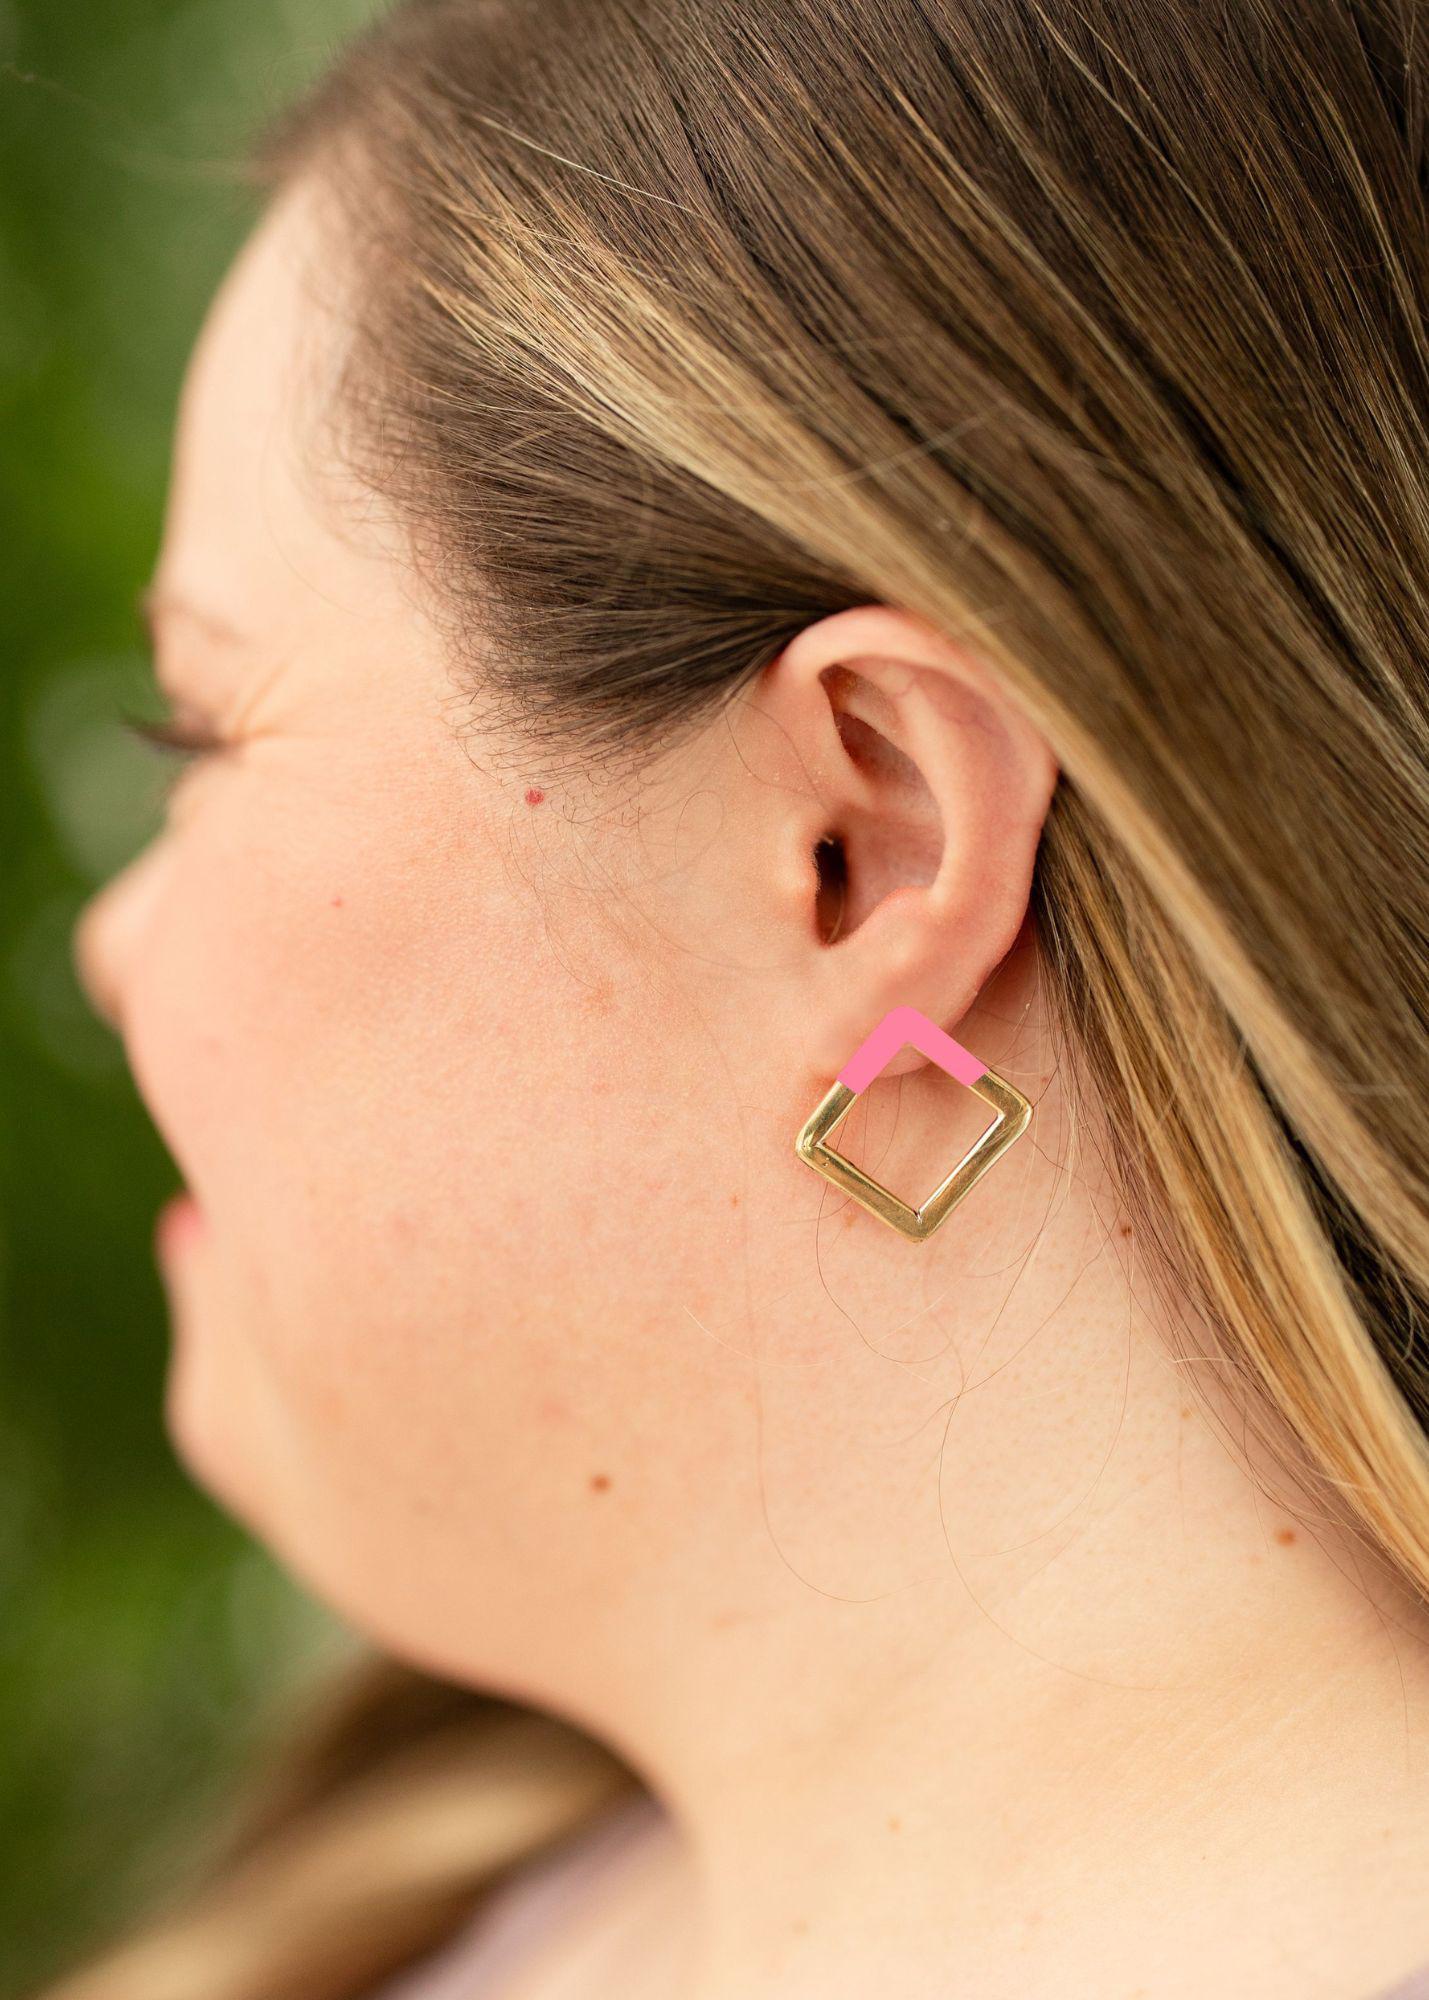 Join the Club | Earring of the Month Subscription